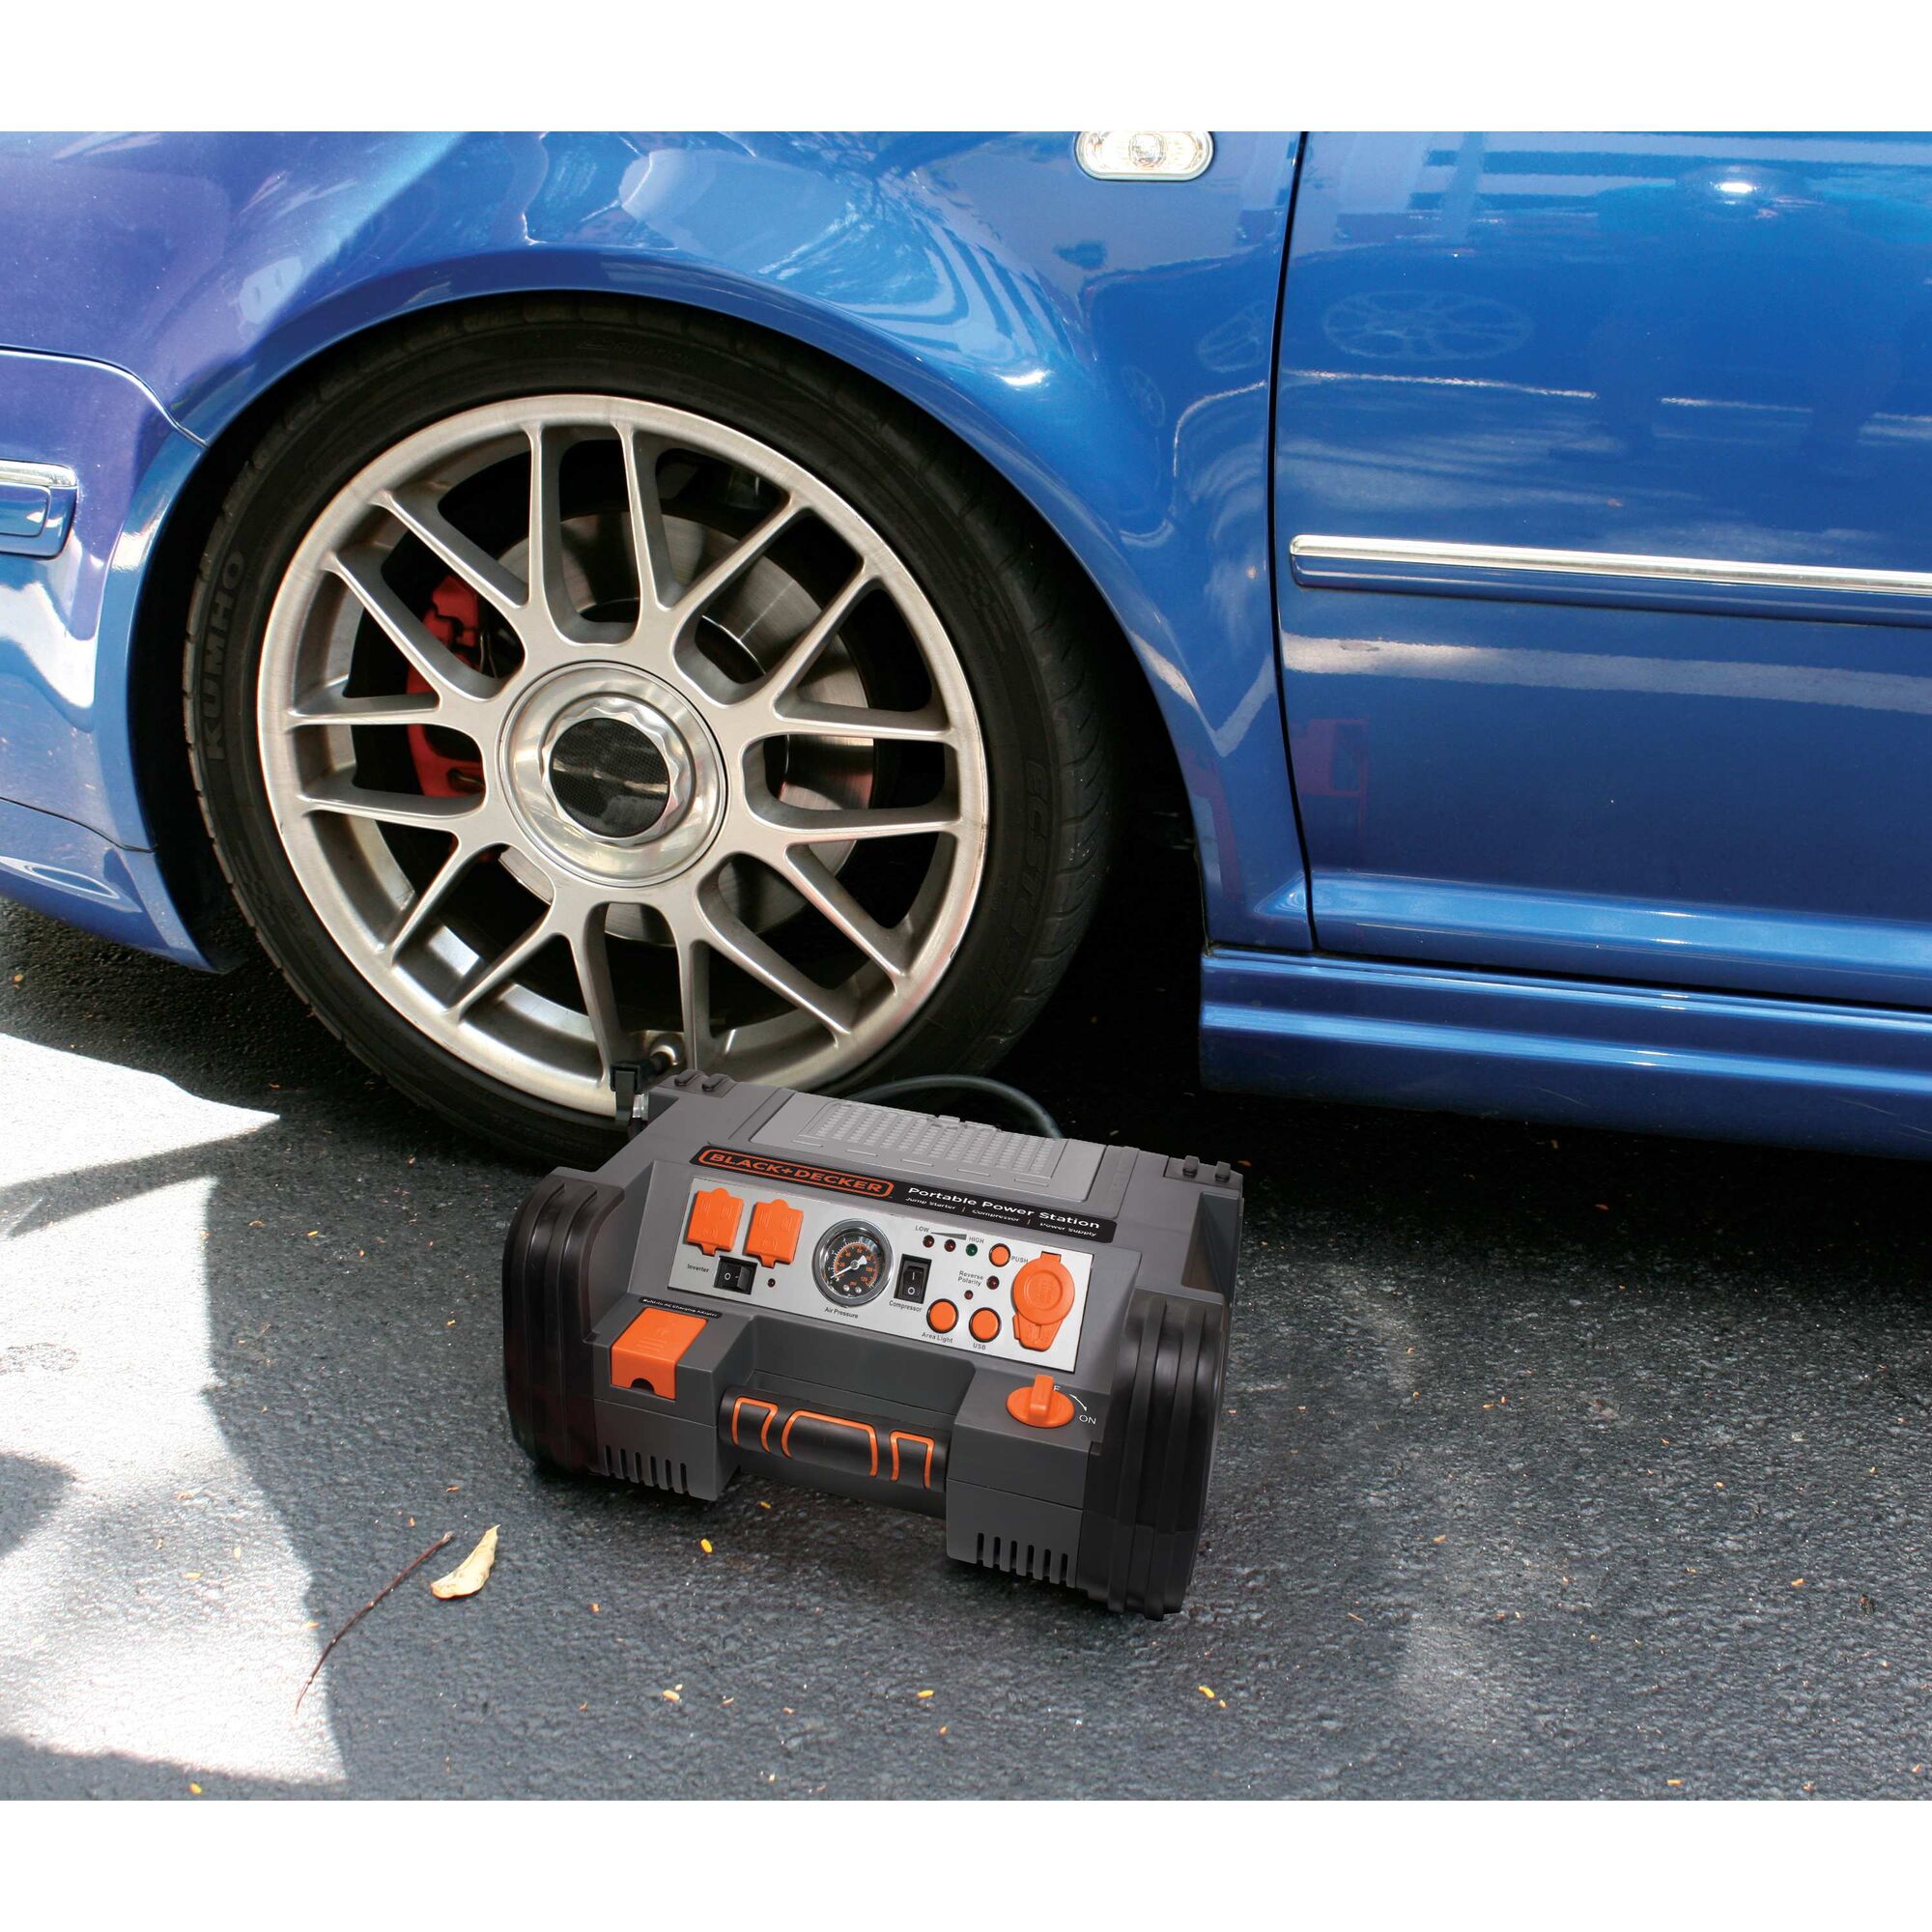 Battery Charger and Maintainer being used to inflate tire of car.